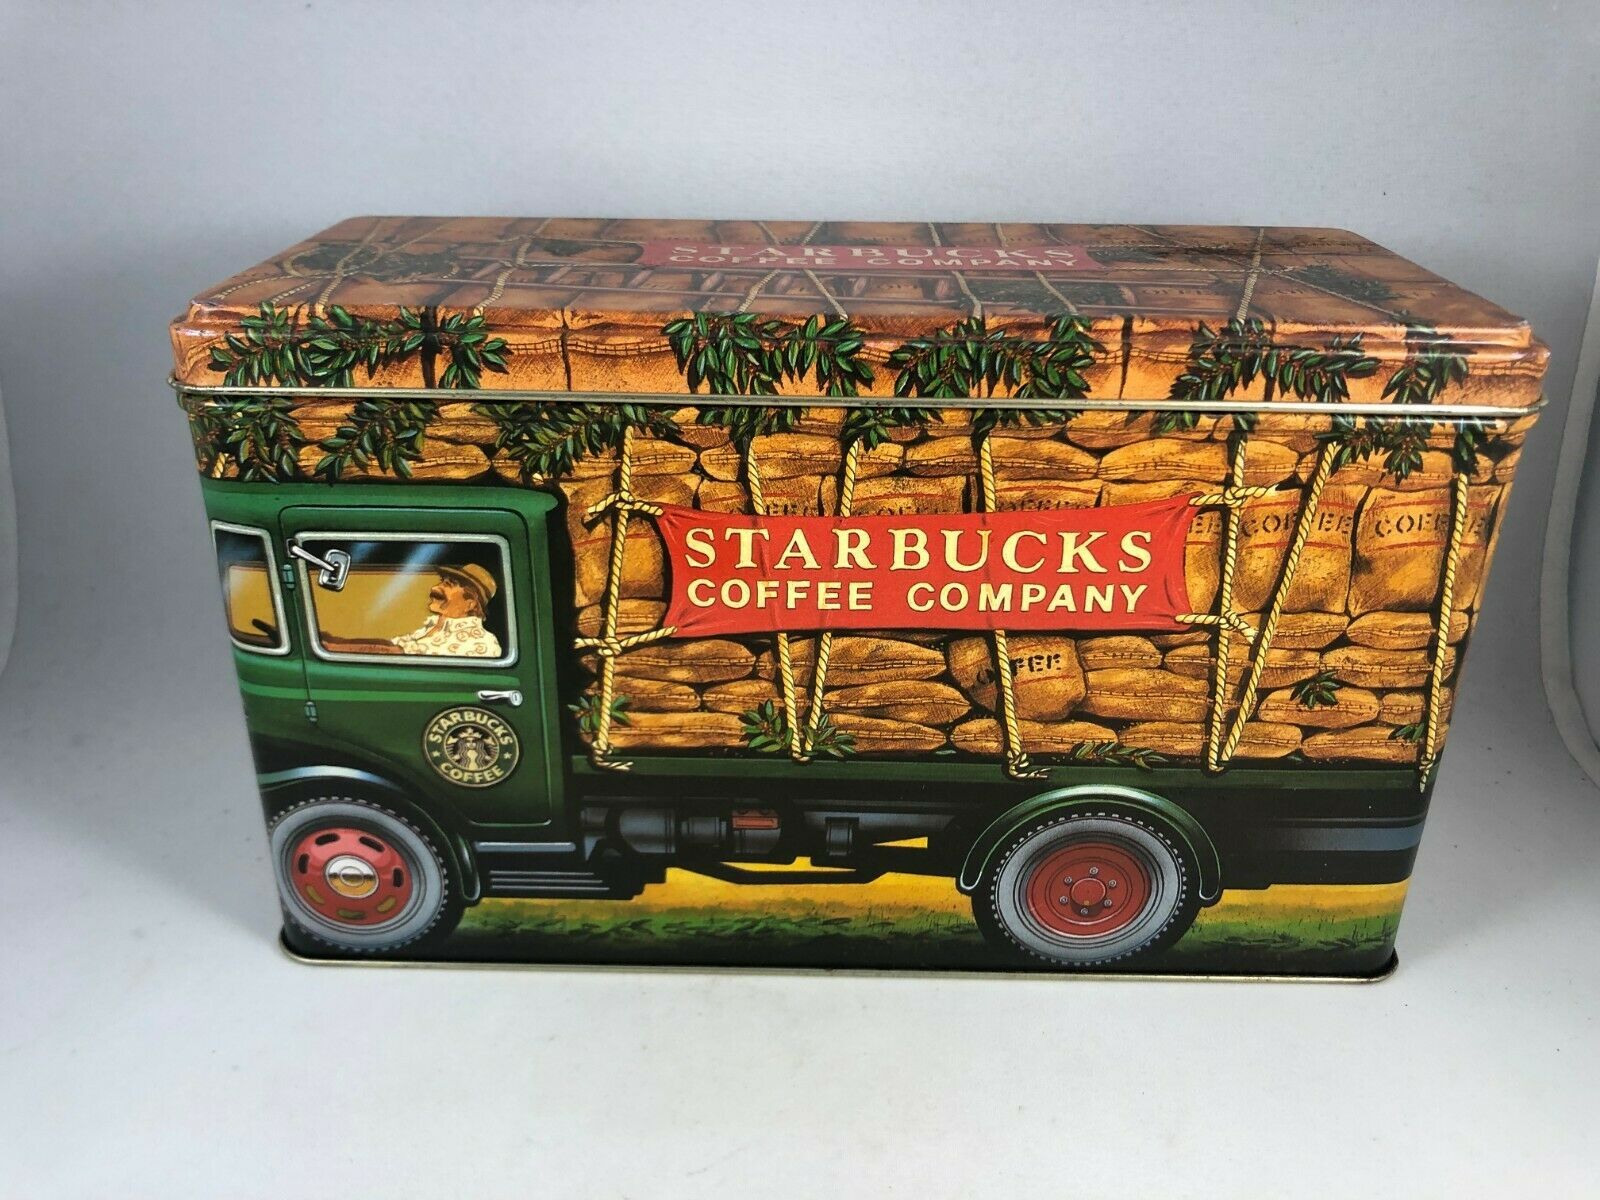 Starbucks Coffee Limited Edition Illustrated Decorative Tin Box Made in England - $23.75